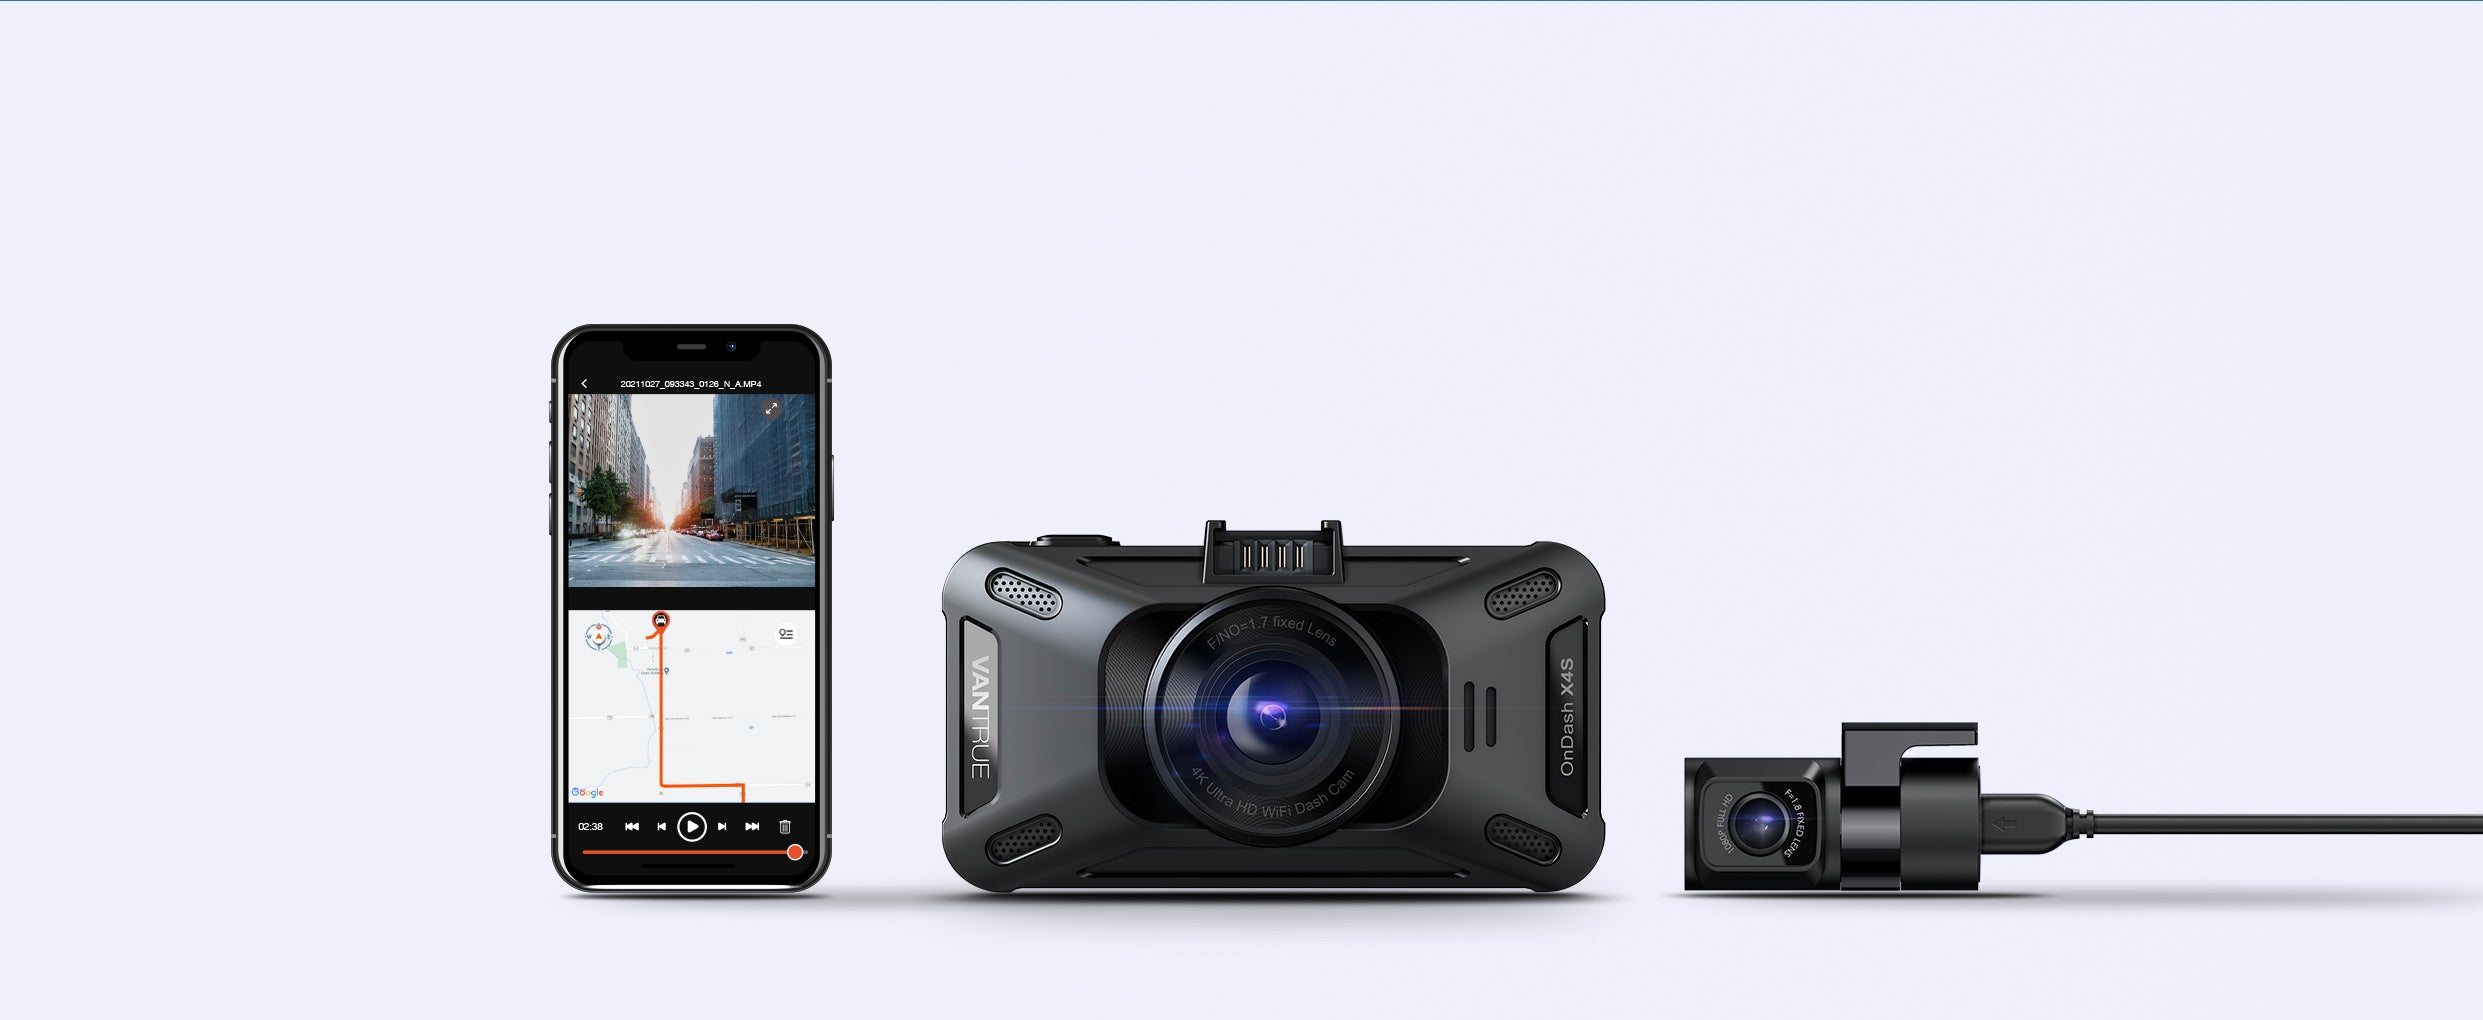 Vantrue X4S(Only Front)4K 5G WiFi Dual Dash Cam, 4K+1080P Wireless Front and Rear Dash Camera with Free App, 24/7 Parking Mode, Super Night Vision